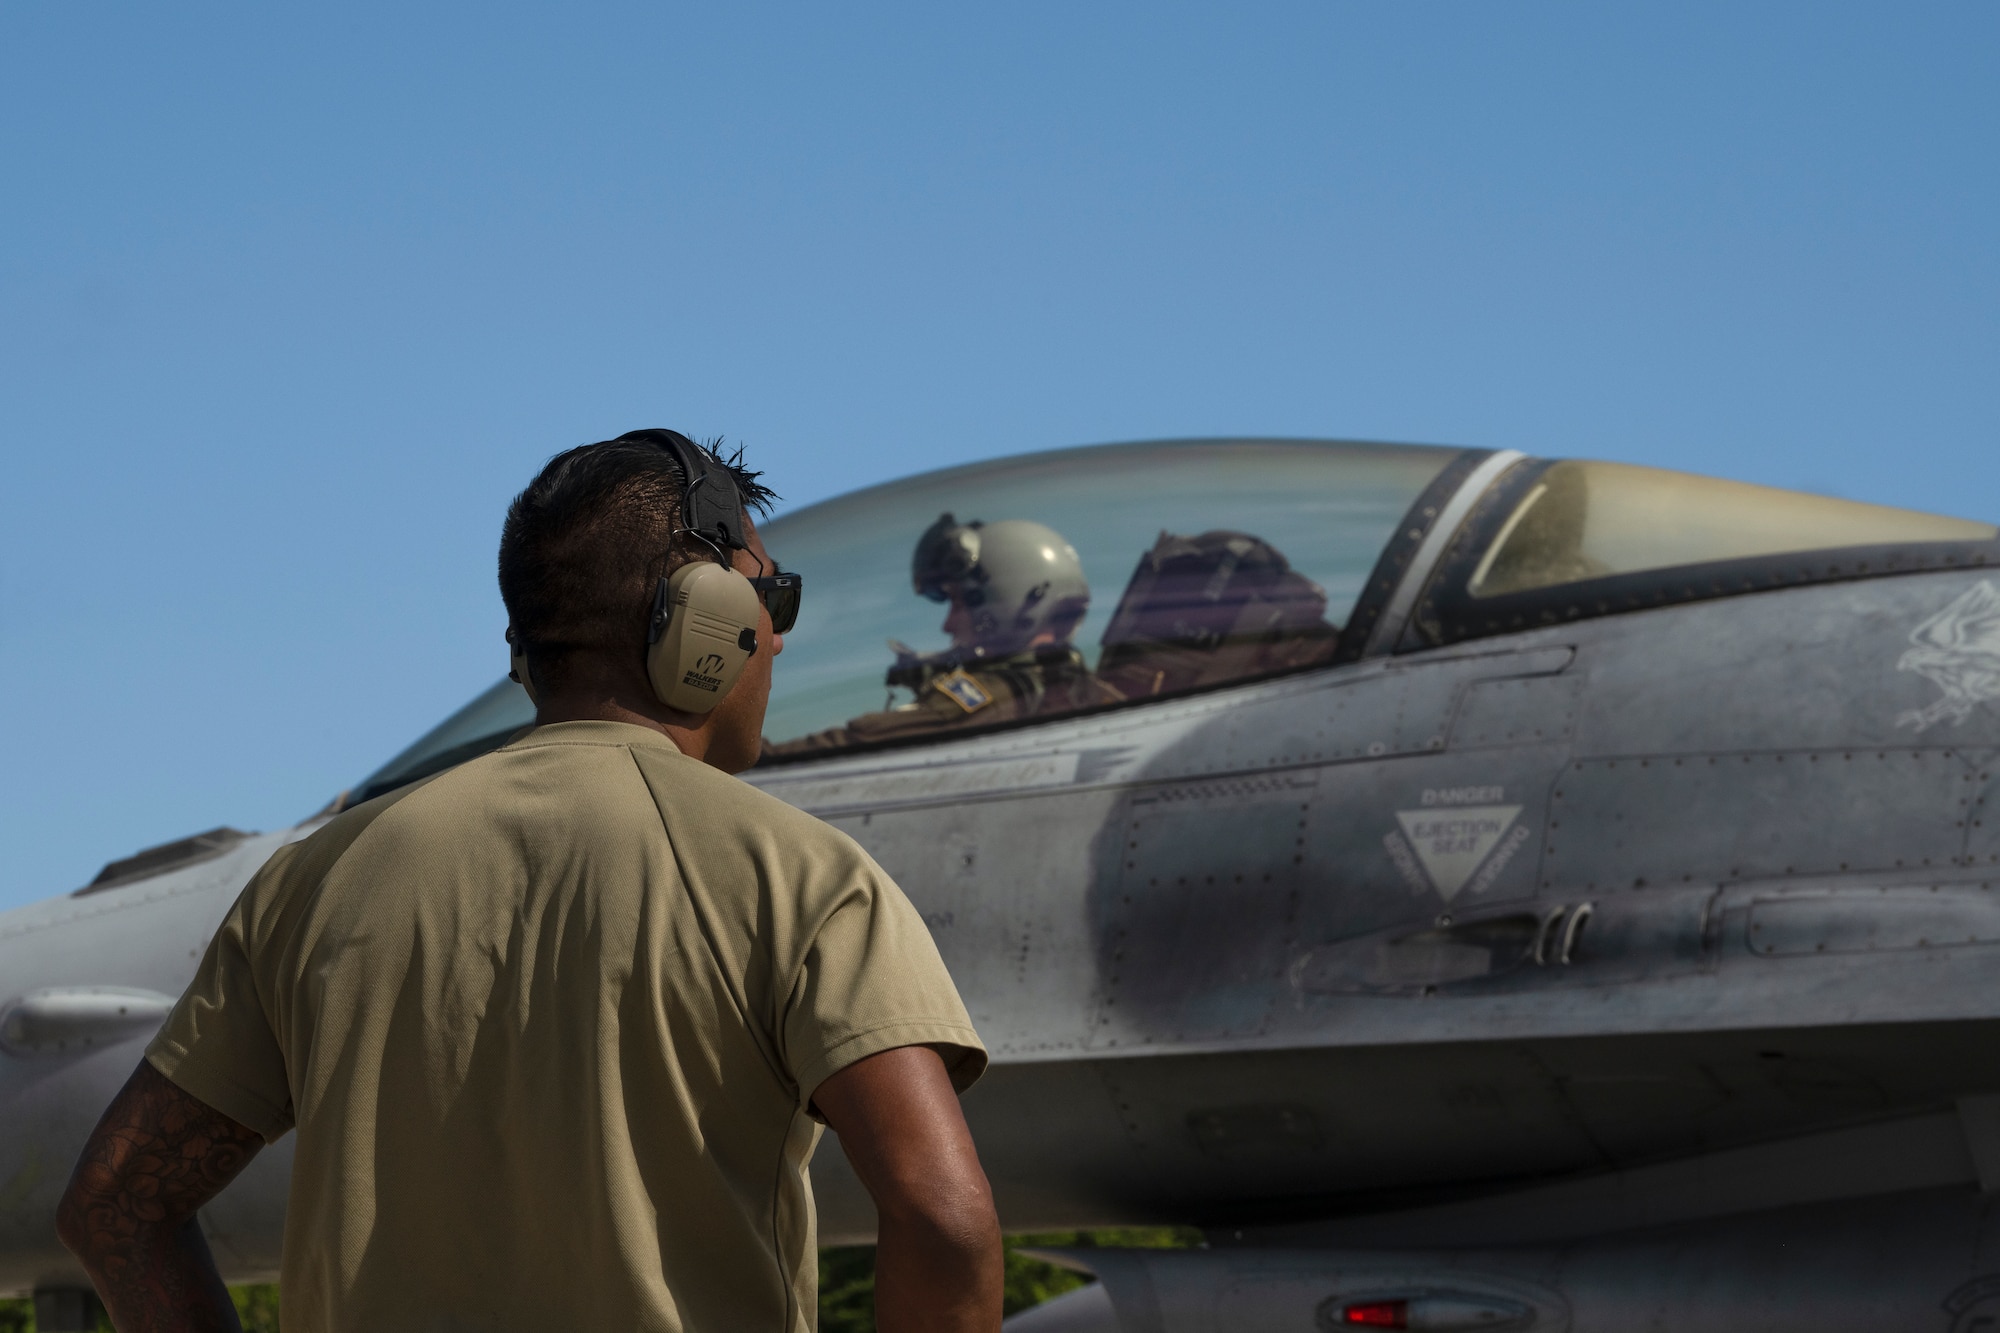 A crew chief prepares an aircraft for takeoff.